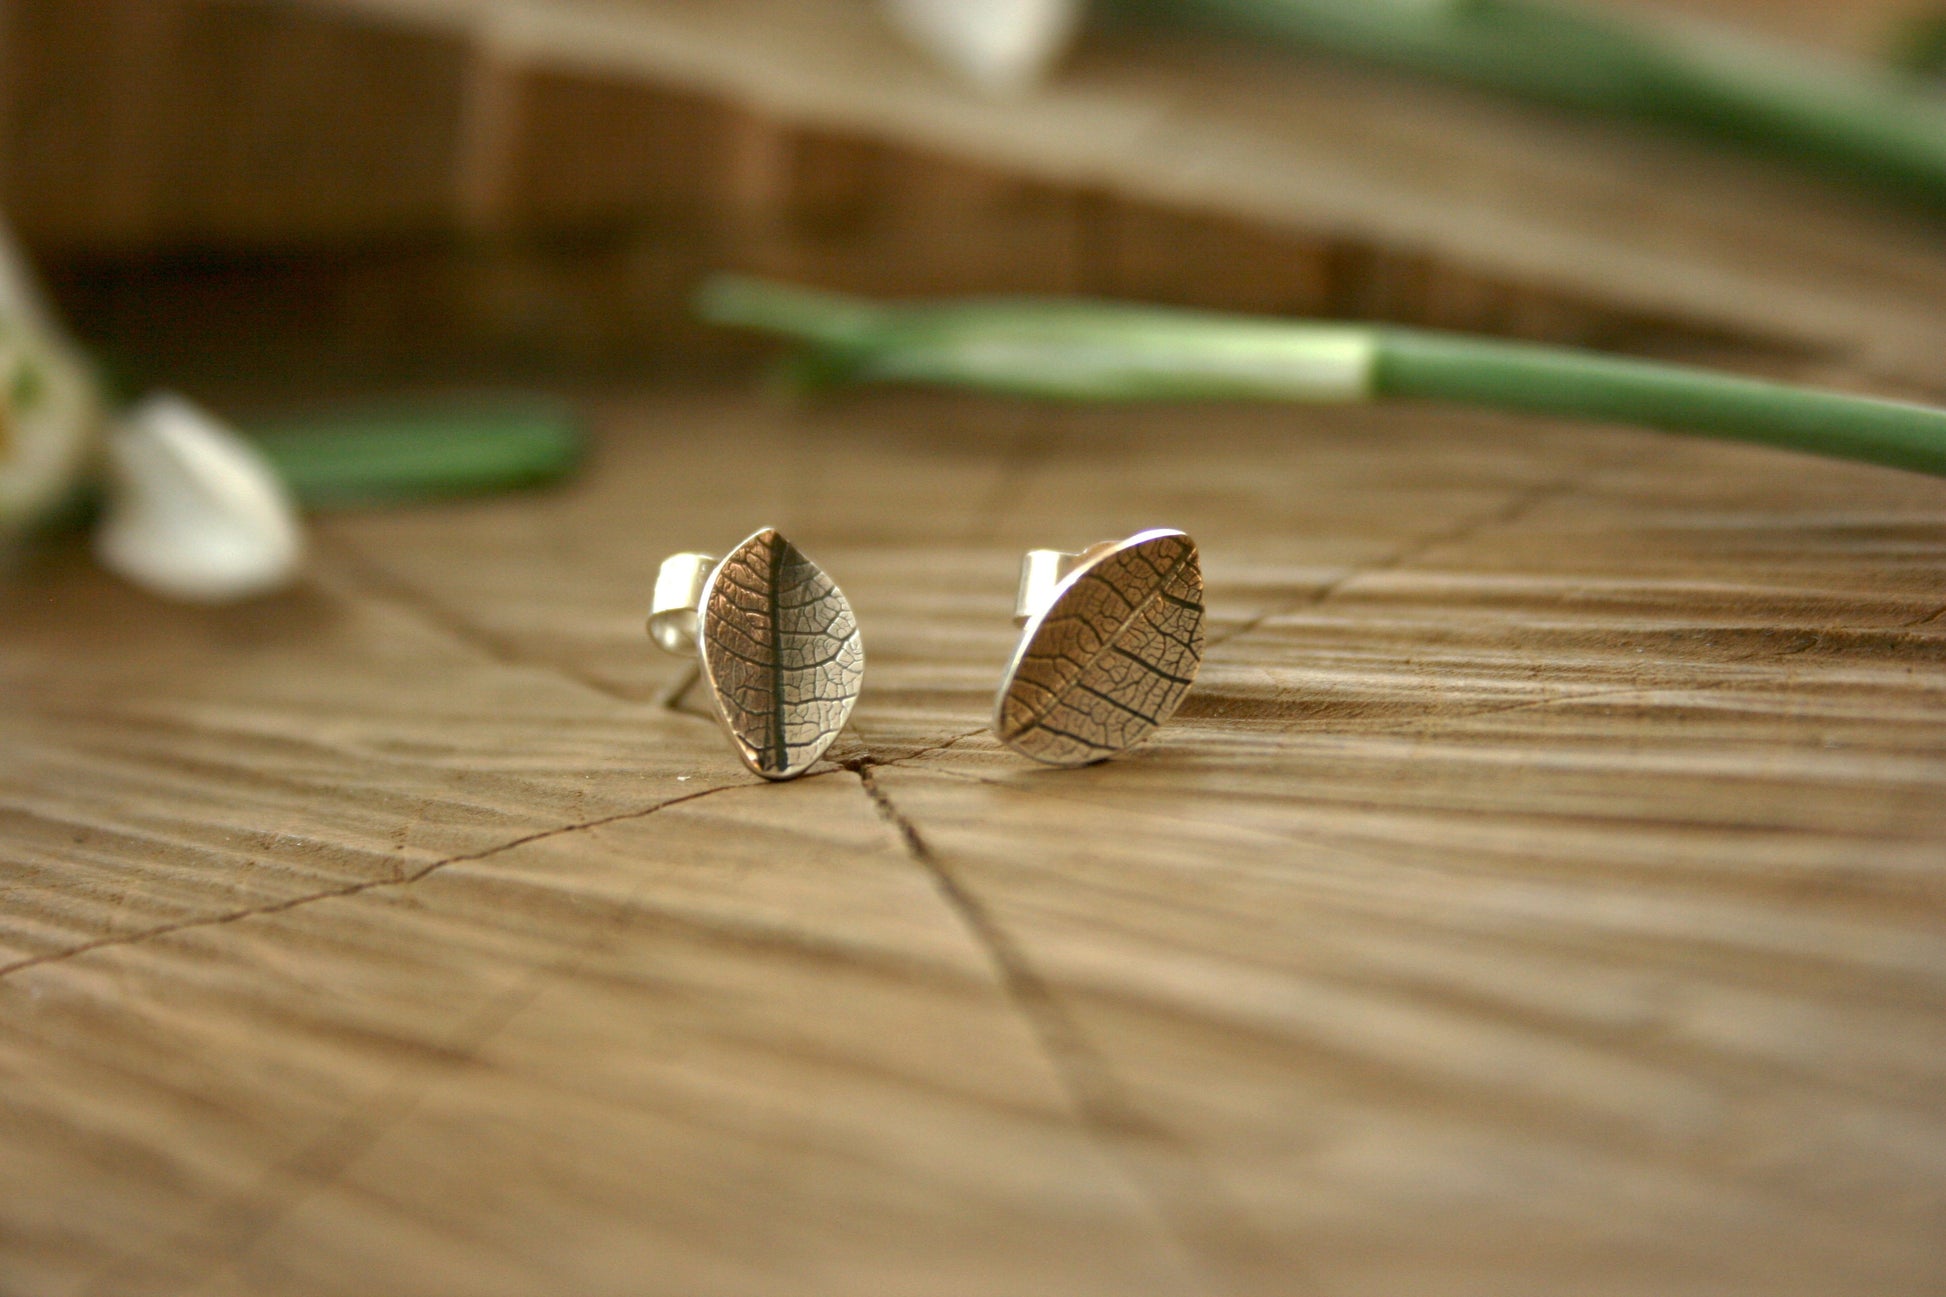 Silver Leaf Stud Earrings by Curious Magpie Jewellery